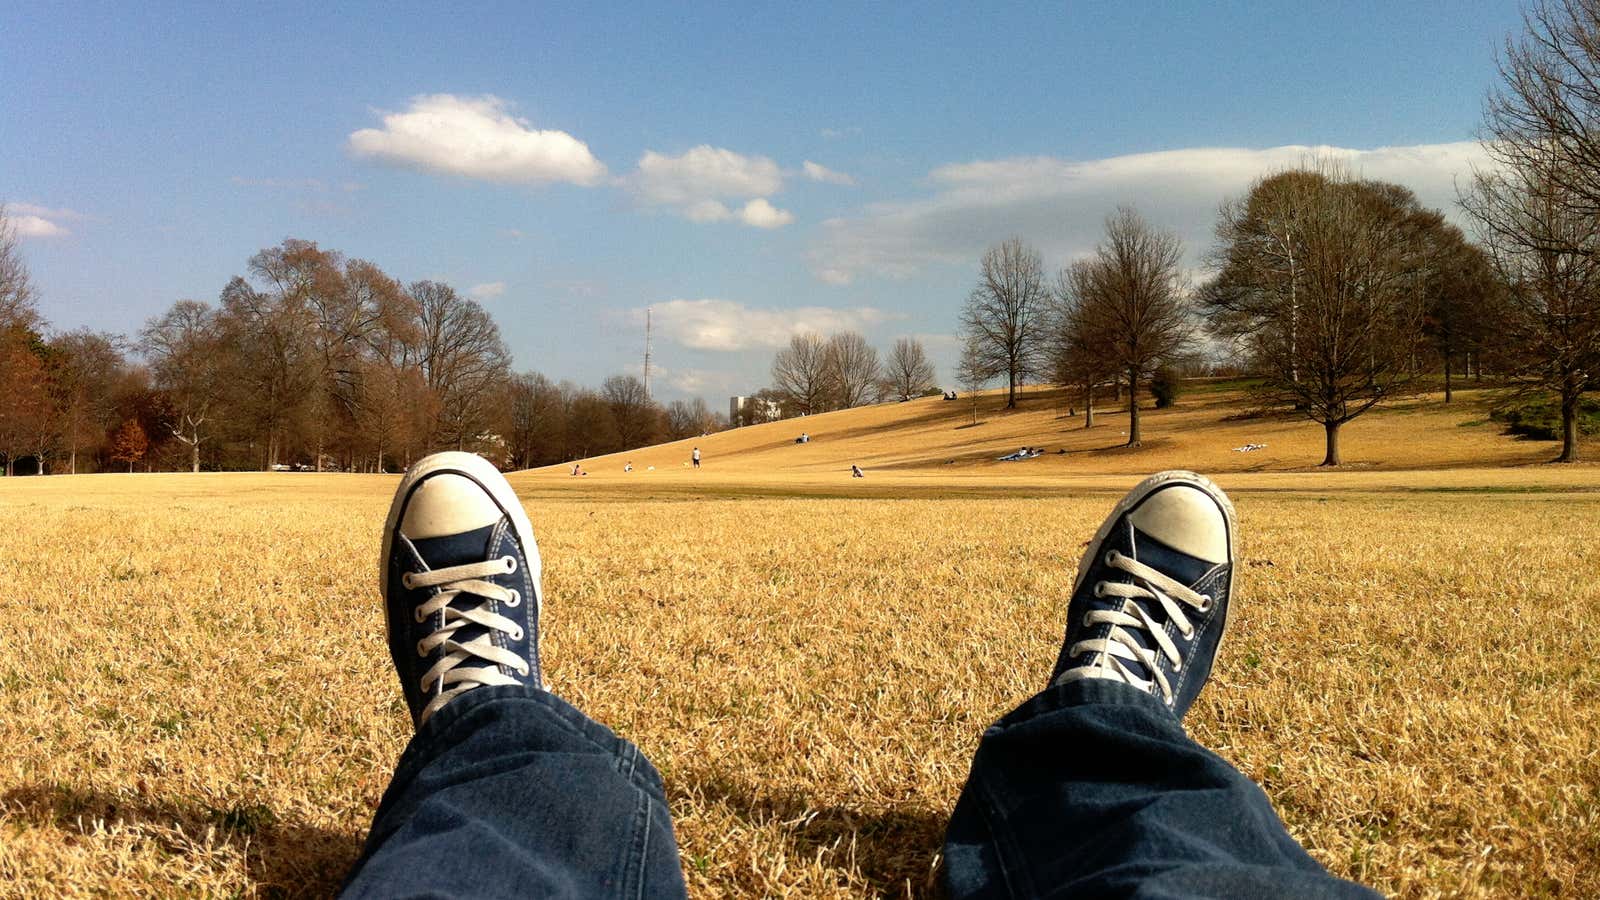 Sometimes you’re busy, alone, in a field, in Converse. And that’s okay.